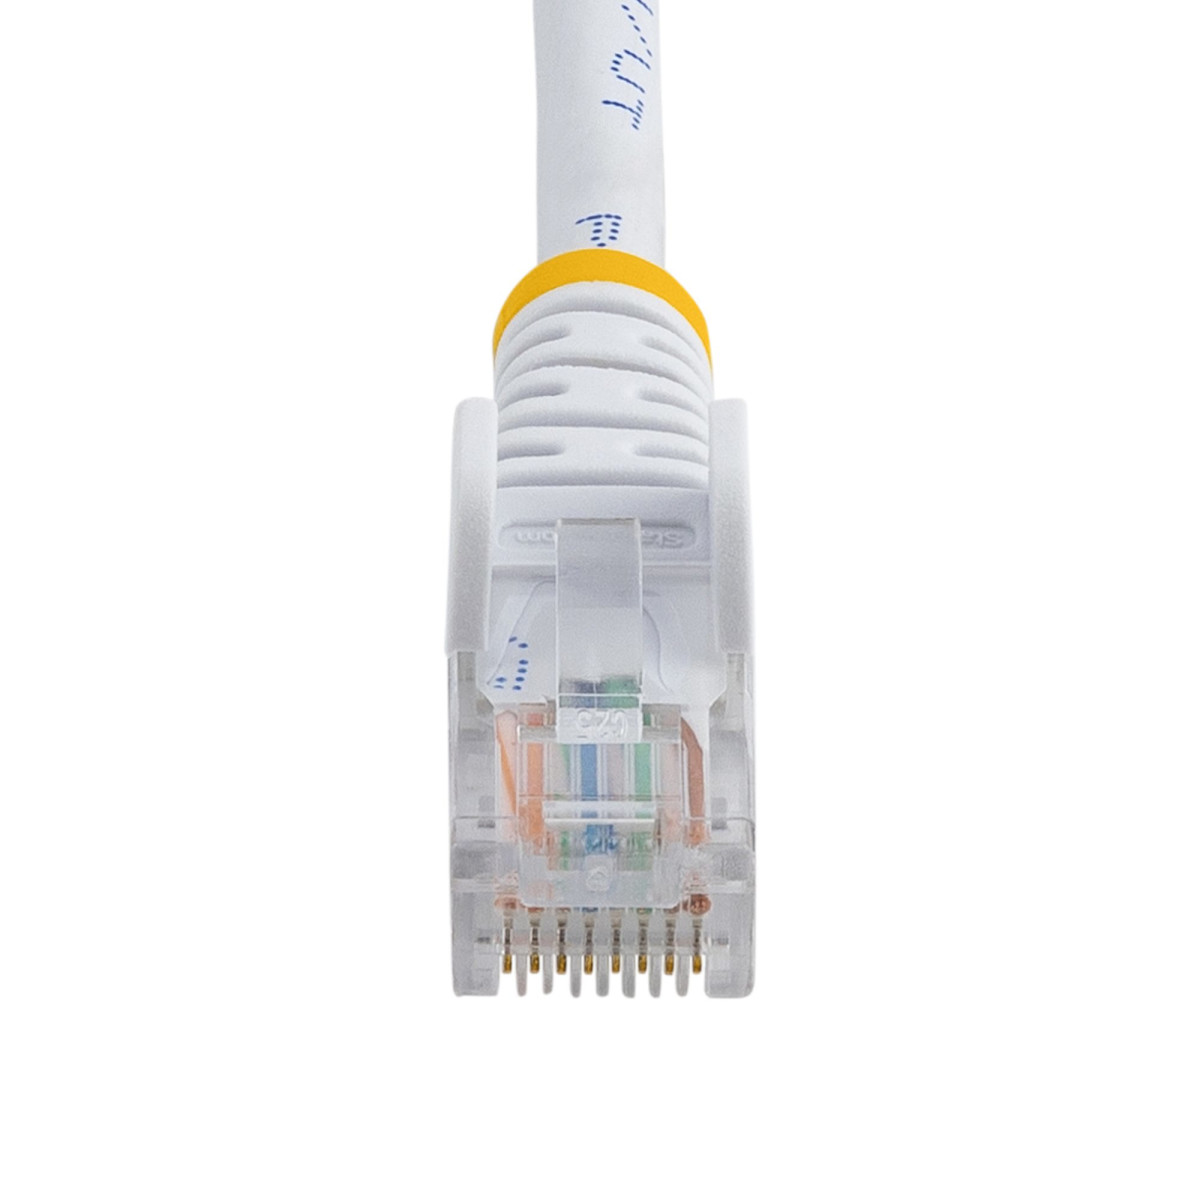 10m White Snagless Cat5e Patch Cable